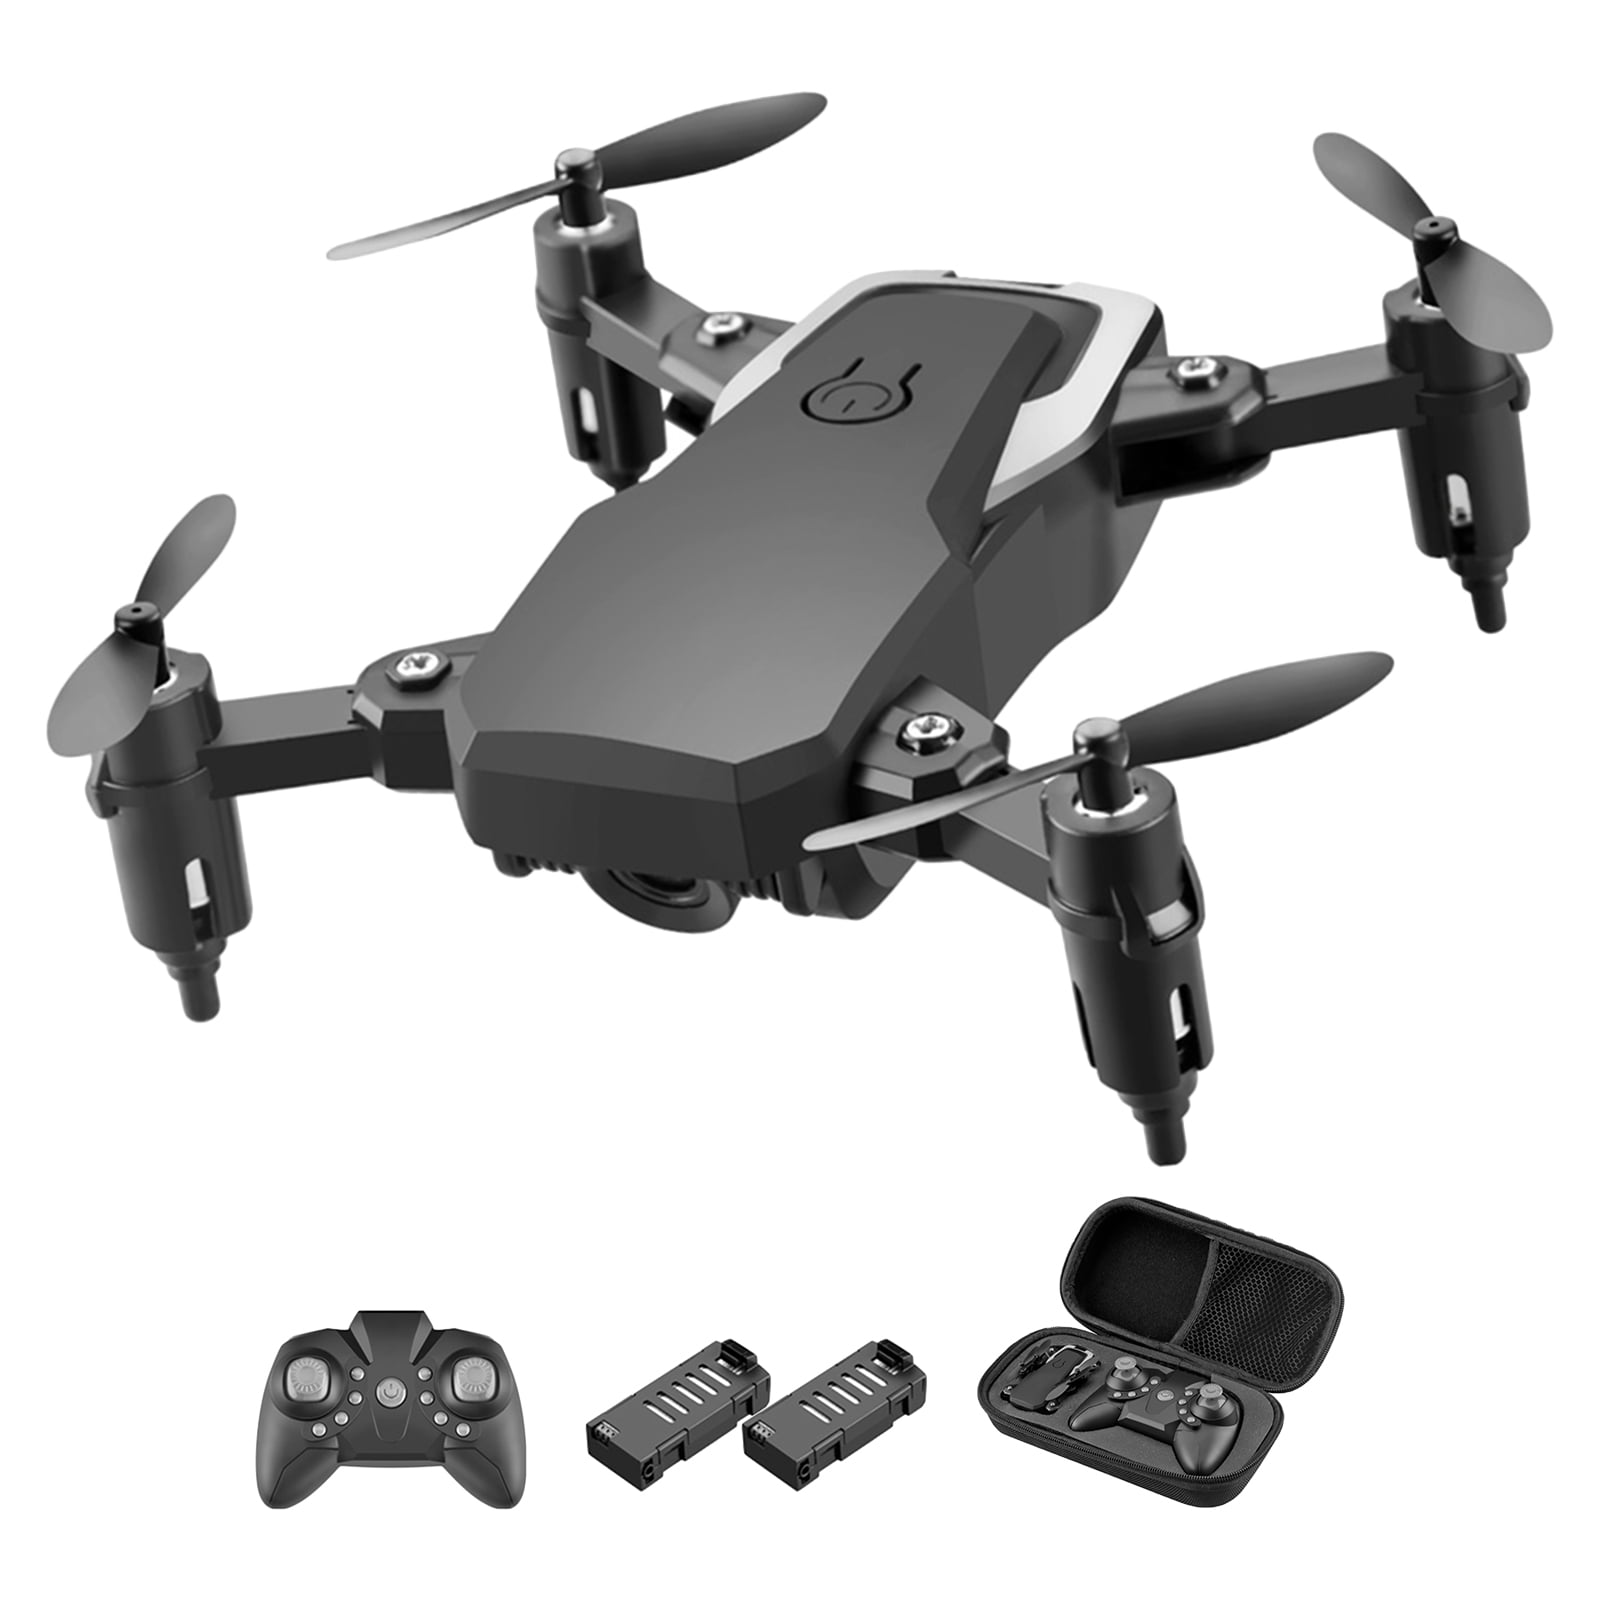 Foldable RC Drone with WIFI Full HD Camera FPV GPS Foldable RC Quadcopter V6Y2 